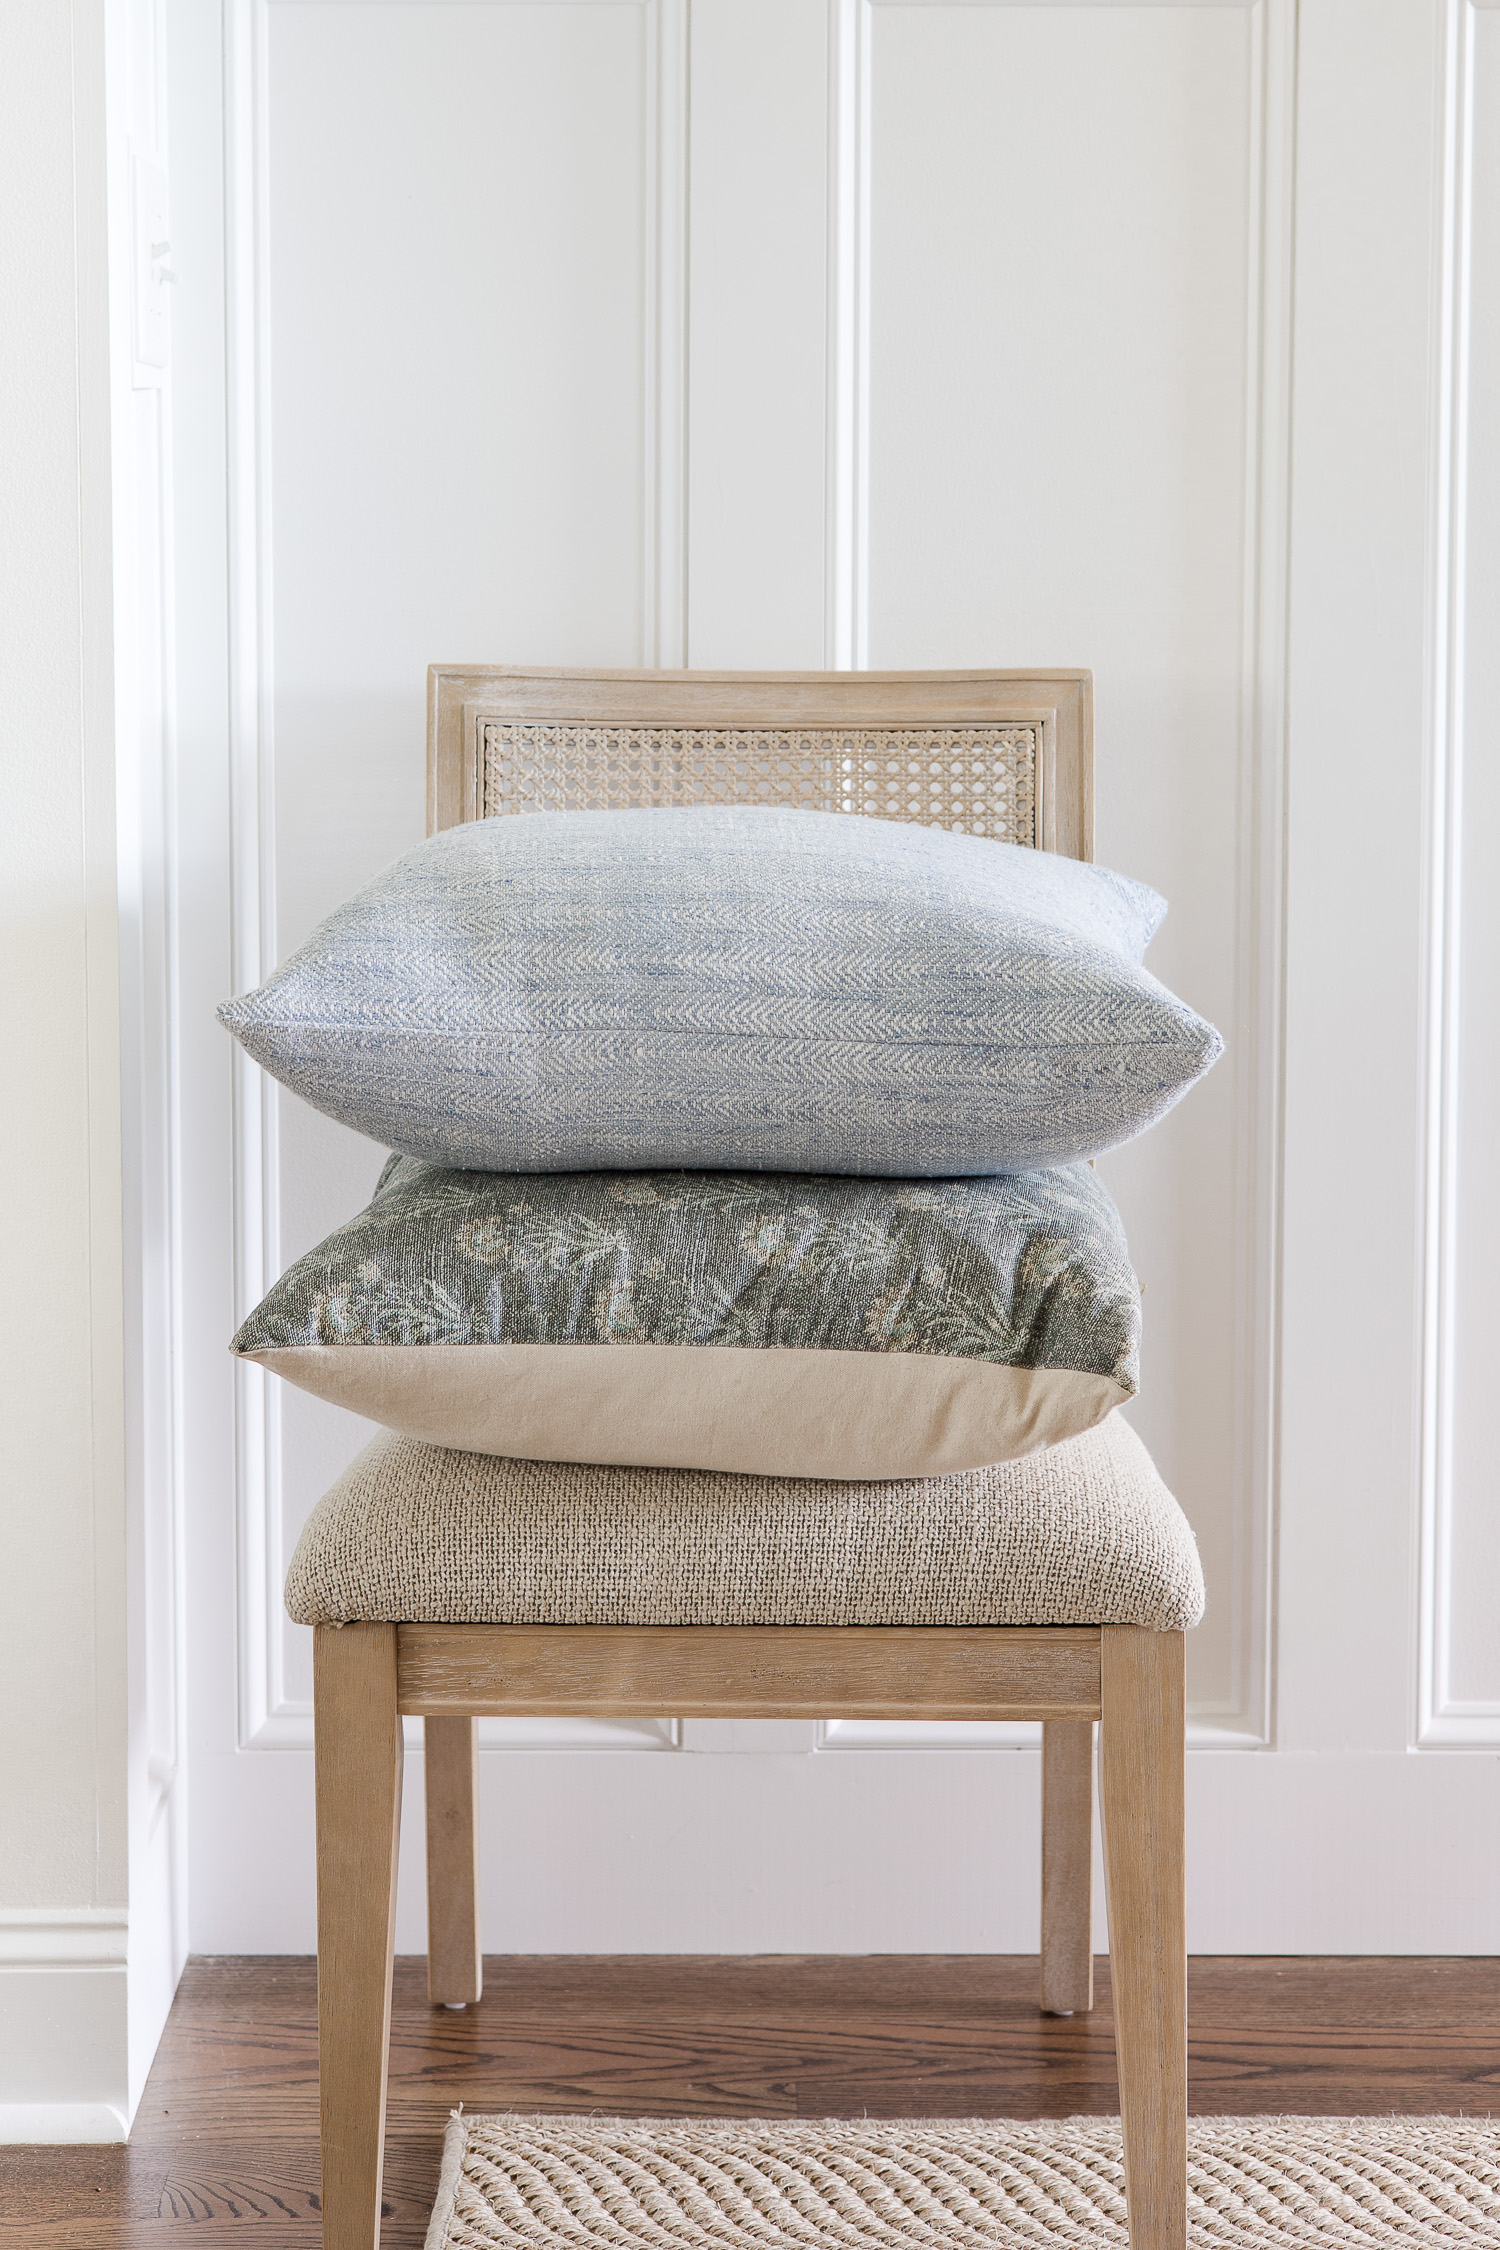 two pillows stack on a chair